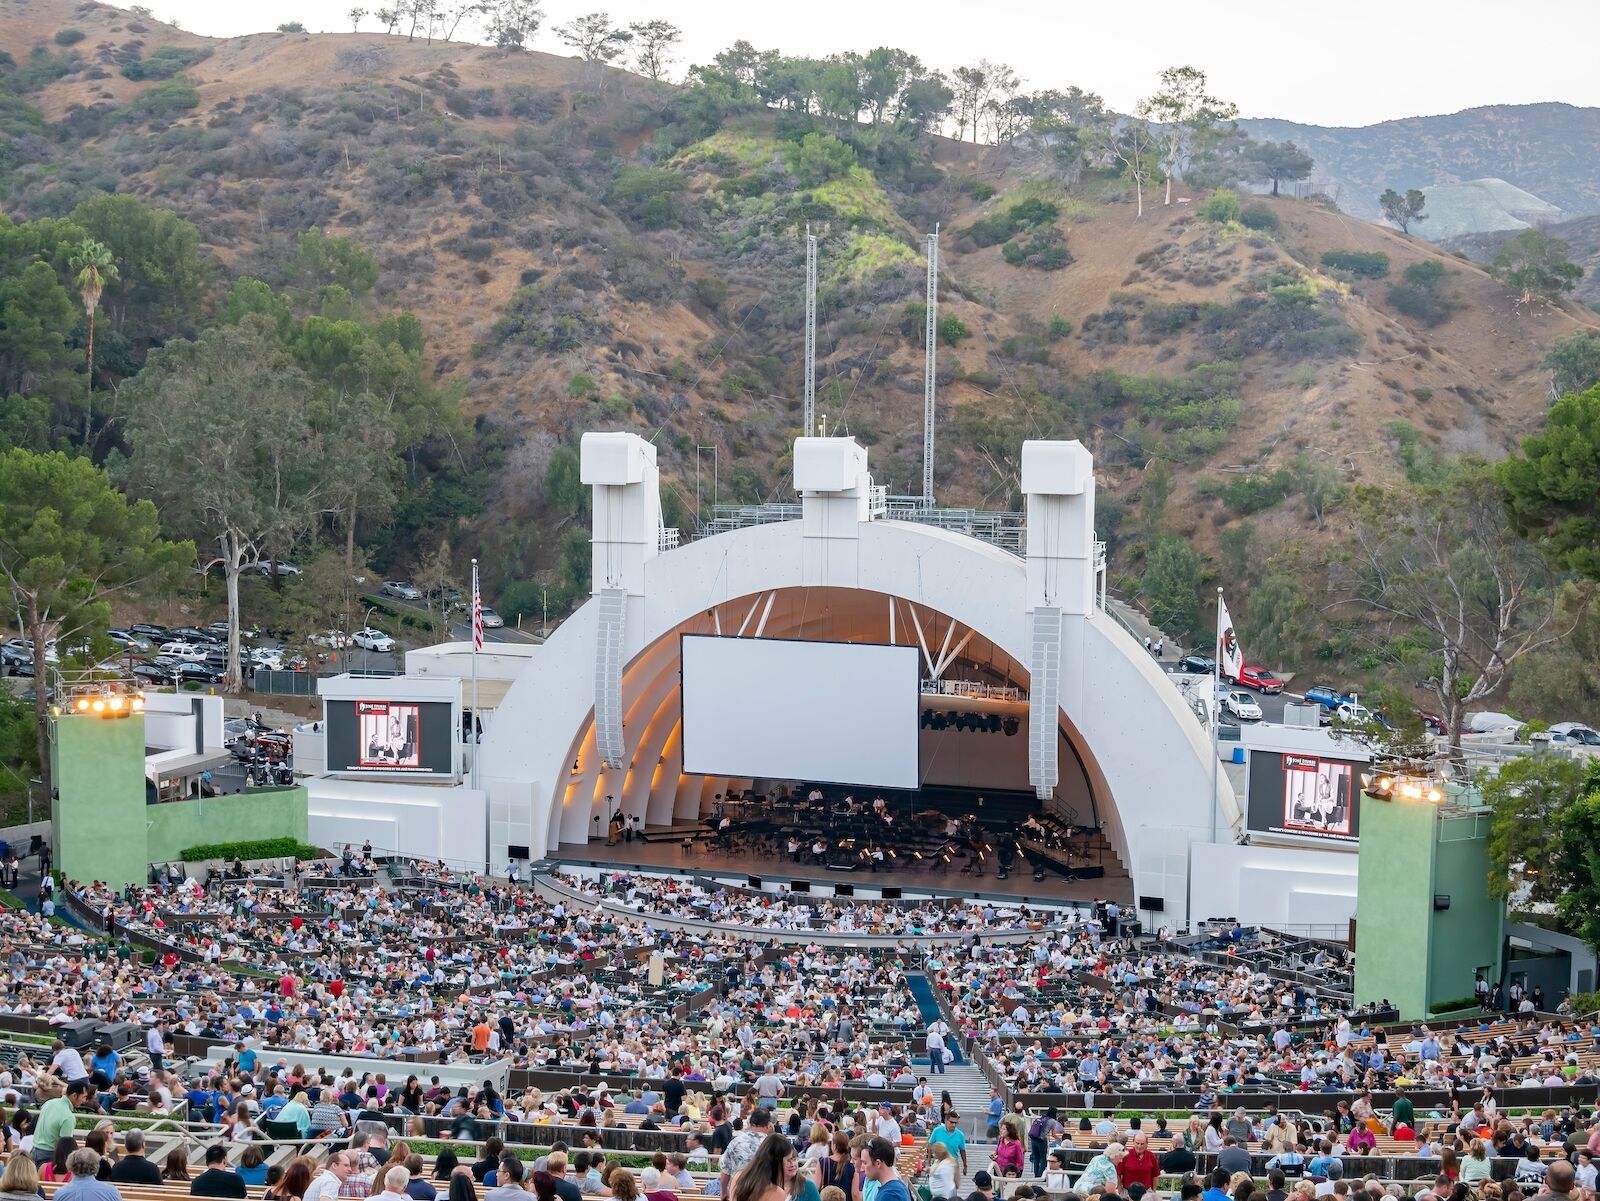 Catching a show at the iconic Hollywood Bowl is one of teh best things to do in Los Angeles